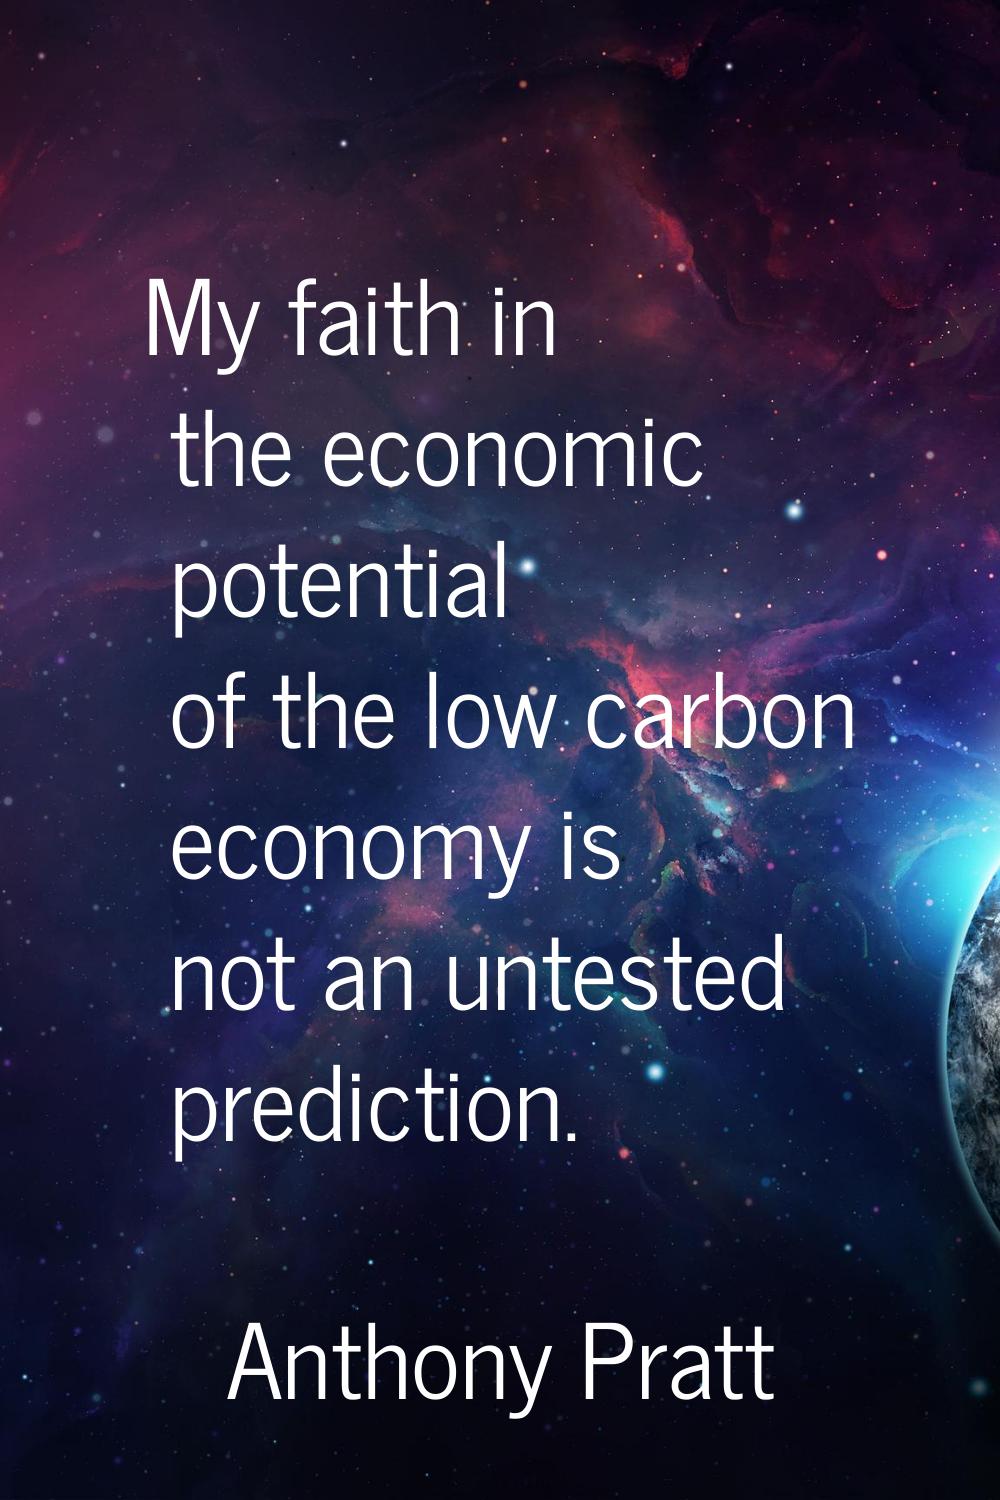 My faith in the economic potential of the low carbon economy is not an untested prediction.